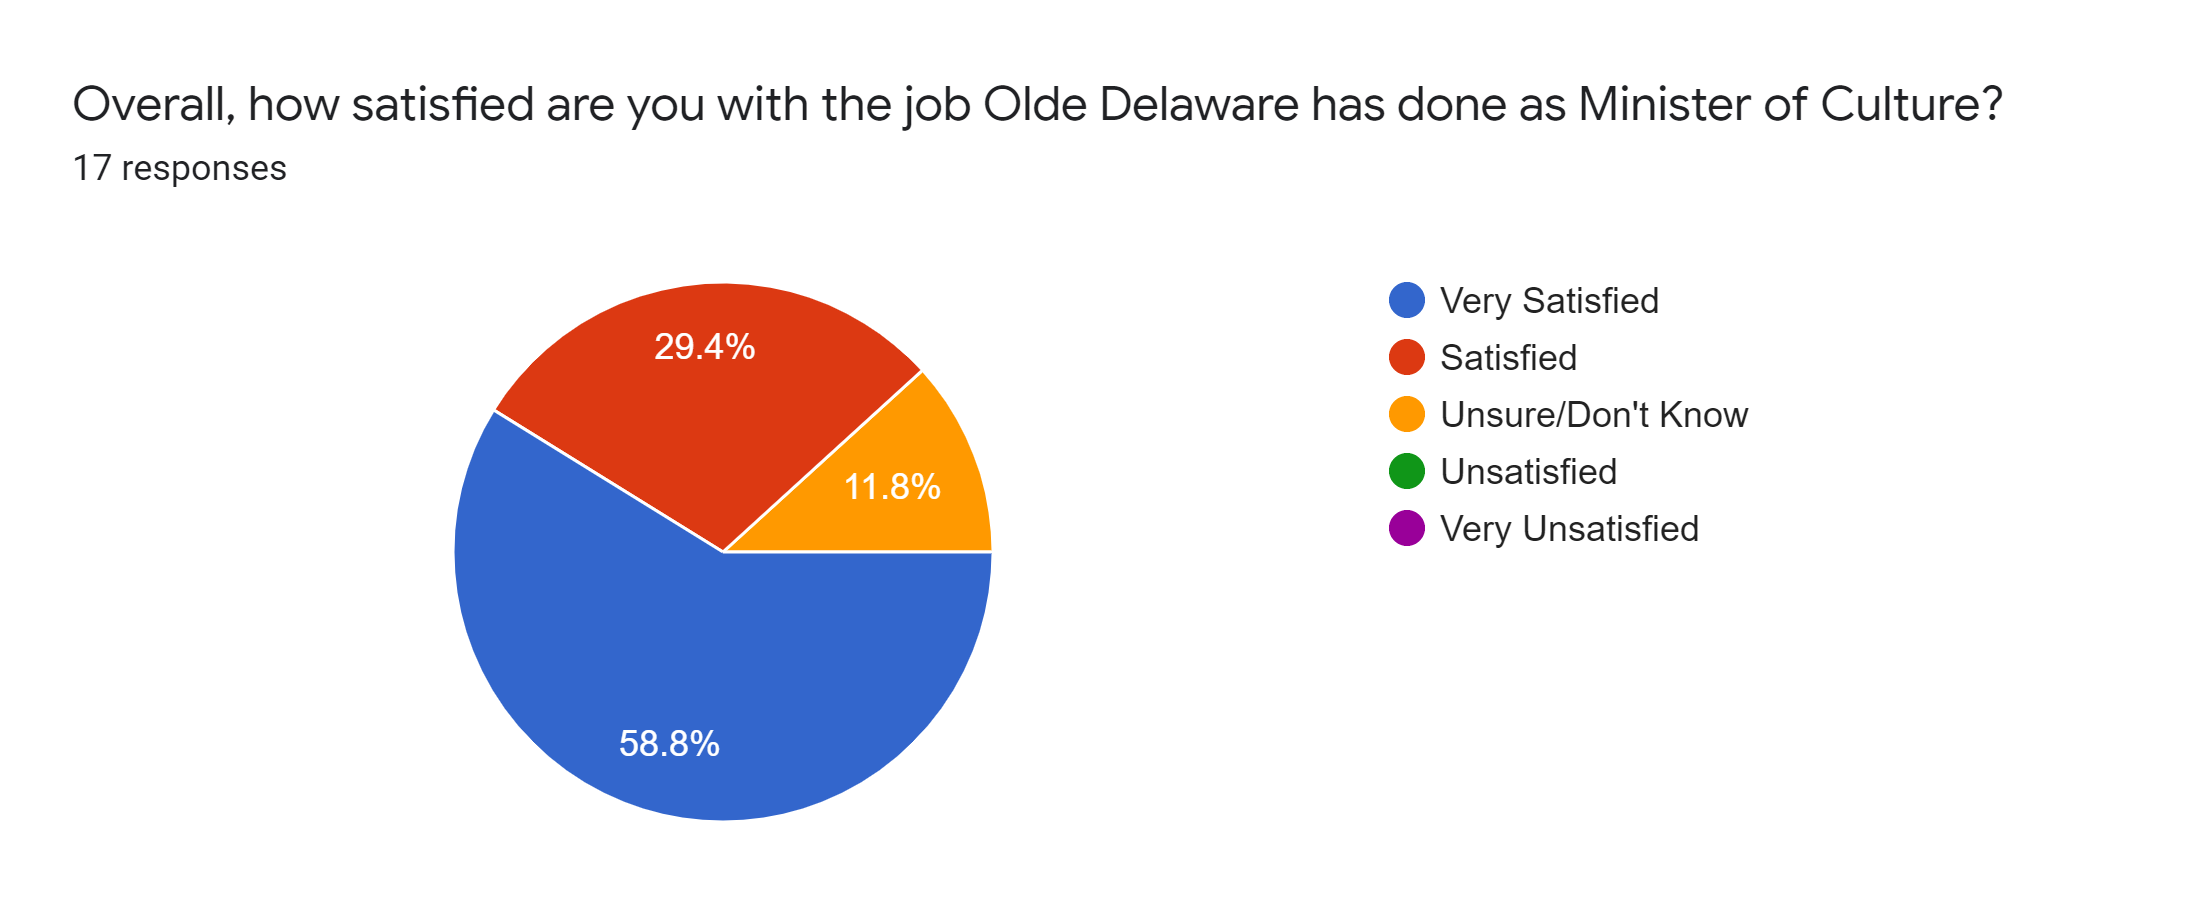 Forms response chart. Question title: Overall, how satisfied are you with the job Olde Delaware has done as Minister of Culture?. Number of responses: 17 responses.